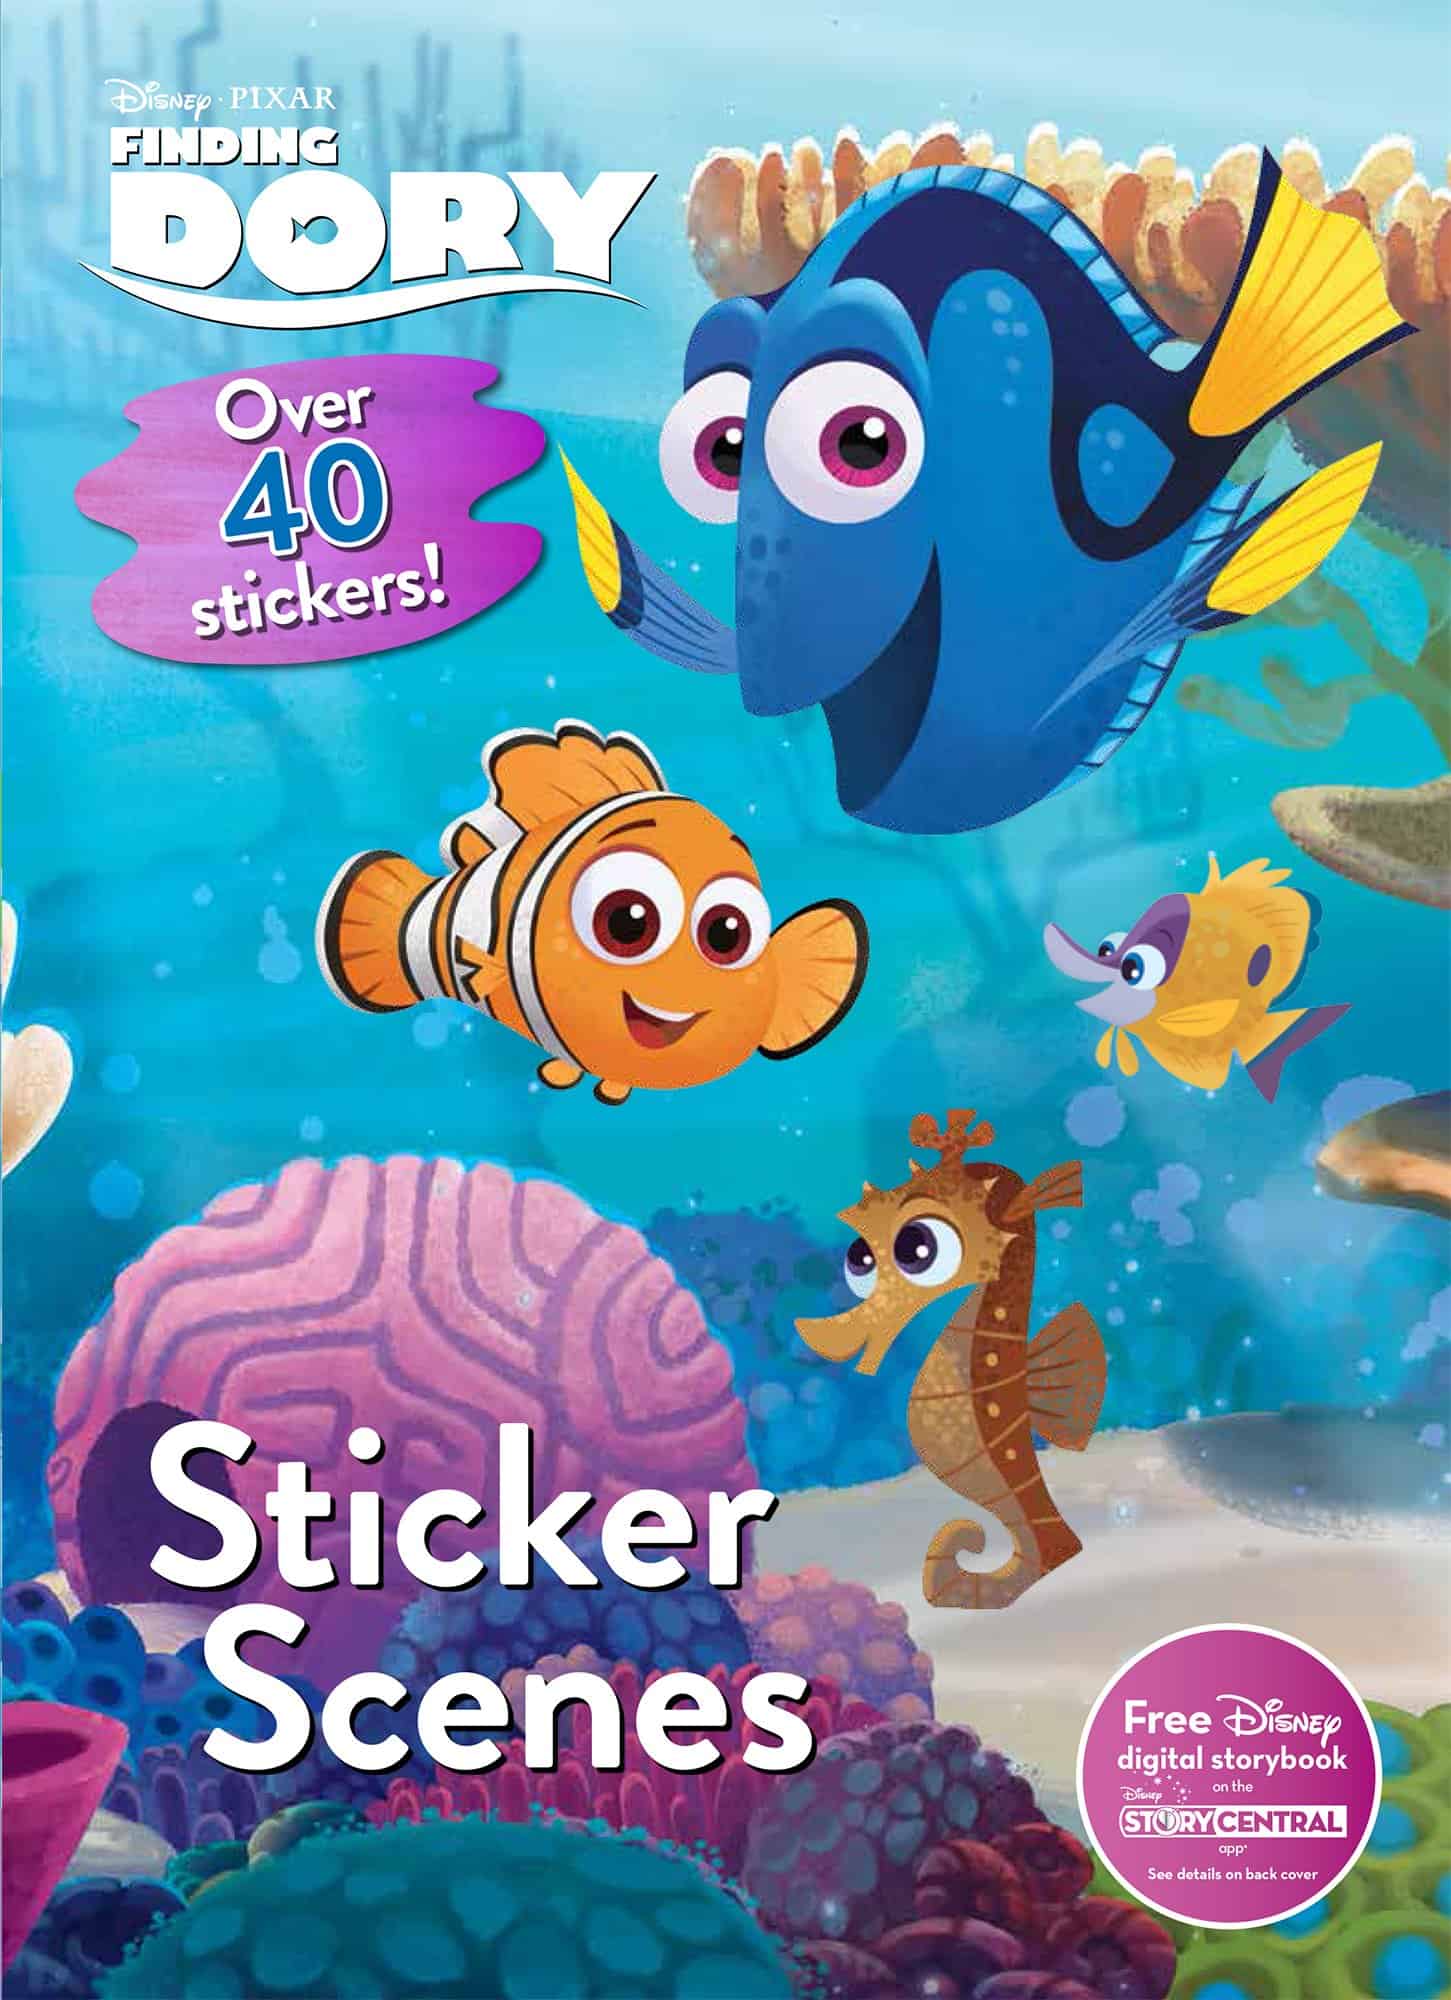 Forgetful Dory is very happy living in the ocean with her friends, Marlin and Nemo. But one day, memories of her long-forgotten parents come flooding back to her. With the help of old friends and new, including Hank the octopus, can Dory finally discover her past? Read the story and complete the scenes with your stickers!